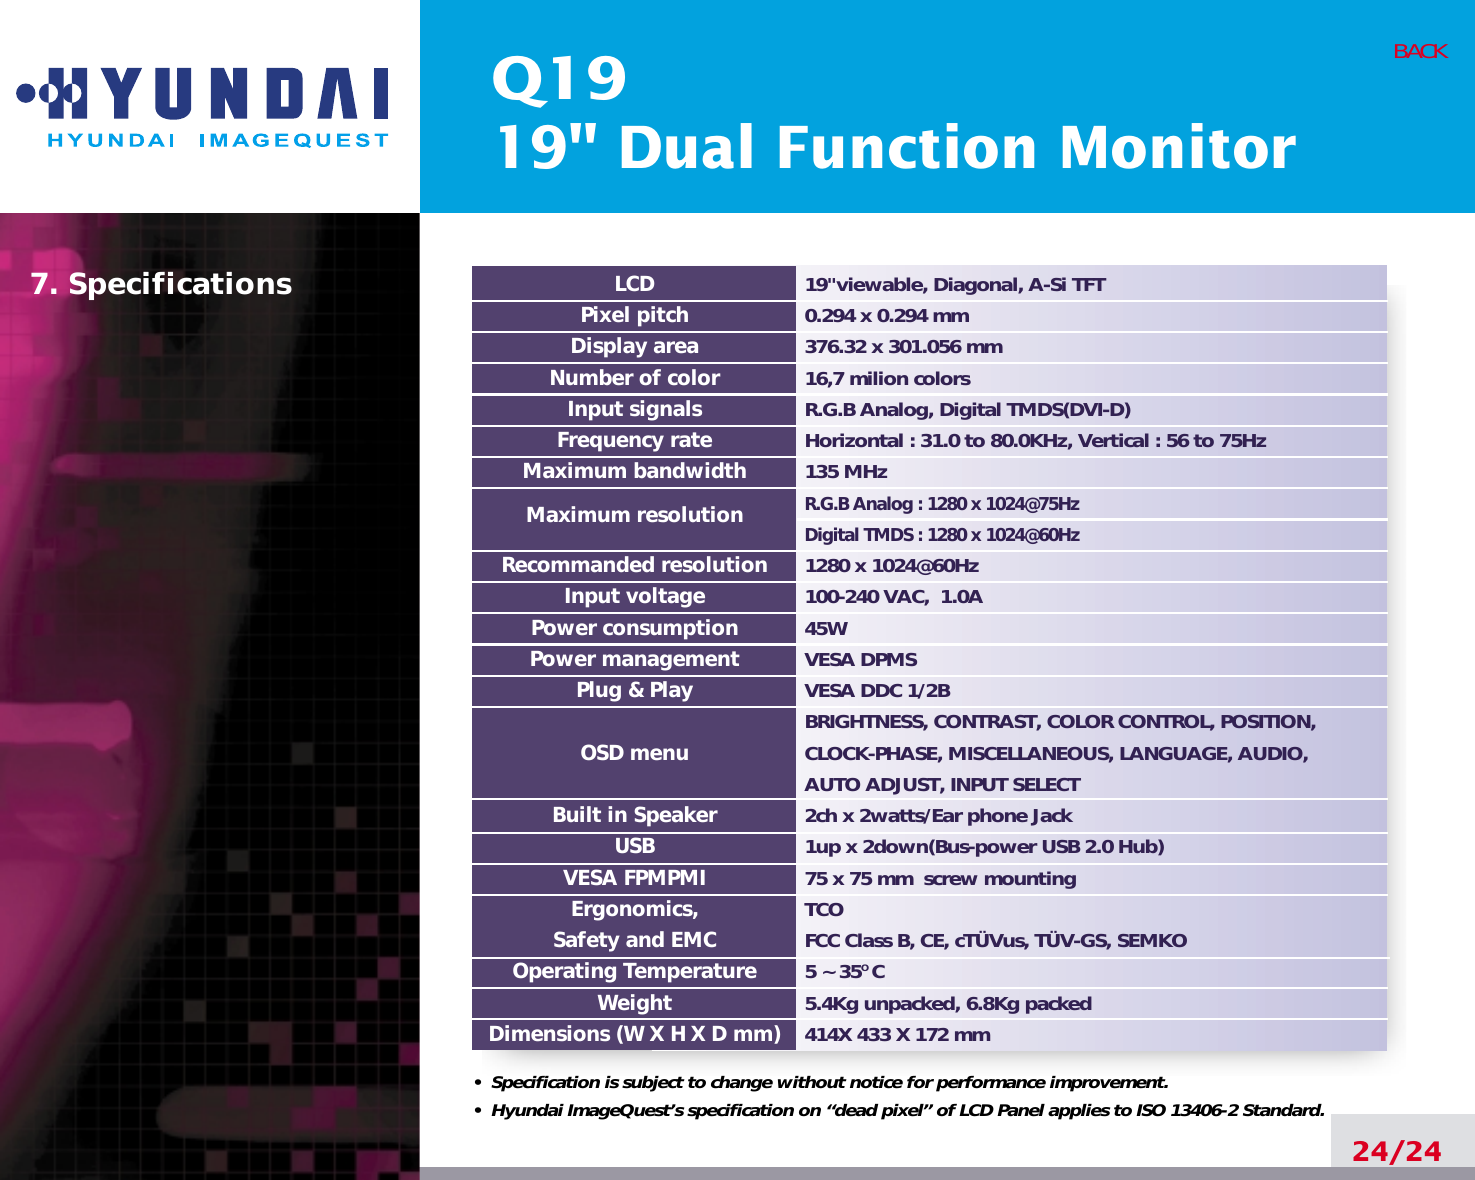 Q1919&quot; Dual Function Monitor24/24BACK19&quot;viewable, Diagonal, A-Si TFT0.294 x 0.294 mm376.32 x 301.056 mm16,7 milion colorsR.G.B Analog, Digital TMDS(DVI-D)Horizontal : 31.0 to 80.0KHz, Vertical : 56 to 75Hz135 MHzR.G.B Analog : 1280 x 1024@75Hz  Digital TMDS : 1280 x 1024@60Hz1280 x 1024@60Hz100-240 VAC,  1.0A45WVESA DPMSVESA DDC 1/2BBRIGHTNESS, CONTRAST, COLOR CONTROL, POSITION, CLOCK-PHASE, MISCELLANEOUS, LANGUAGE, AUDIO,AUTO ADJUST, INPUT SELECT2ch x 2watts/Ear phone Jack1up x 2down(Bus-power USB 2.0 Hub)75 x 75 mm  screw mountingTCO FCC Class B, CE, cTÜVus, TÜV-GS, SEMKO5 ~ 35O C5.4Kg unpacked, 6.8Kg packed414X 433 X 172 mmLCDPixel pitchDisplay areaNumber of colorInput signalsFrequency rateMaximum bandwidthMaximum resolutionRecommanded resolutionInput voltagePower consumptionPower managementPlug &amp; PlayOSD menuBuilt in SpeakerUSBVESA FPMPMIErgonomics,Safety and EMCOperating TemperatureWeightDimensions (W X H X D mm)7. Specifications•  Specification is subject to change without notice for performance improvement.•  Hyundai ImageQuest’s specification on “dead pixel” of LCD Panel applies to ISO 13406-2 Standard.